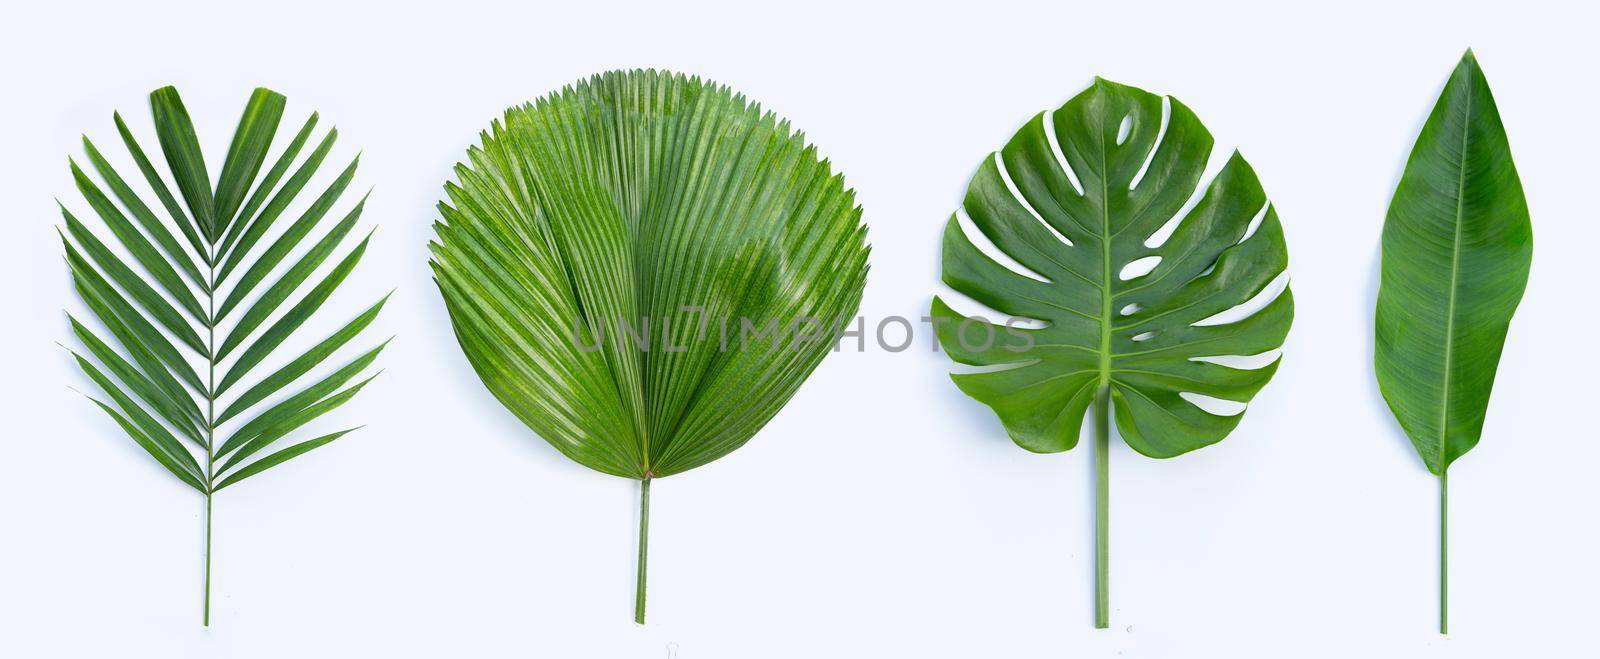 Tropical palm leaves with monstera plant leaves and  heliconia green leaves on white background.  by Bowonpat